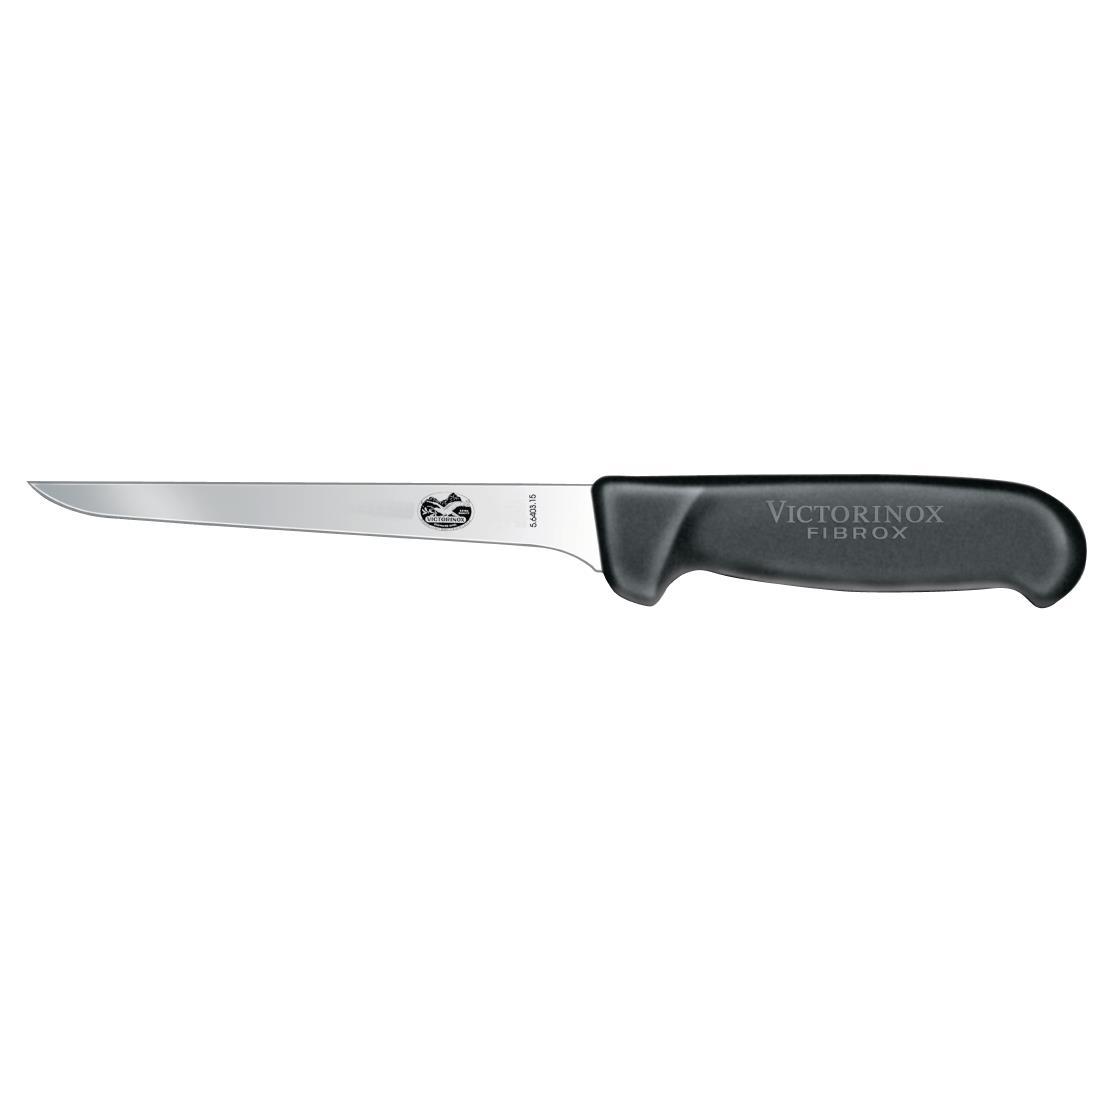 Victorinox 21.5cm Chefs Knife with Hygiplas and Vogue Knife Set - F221  - 6